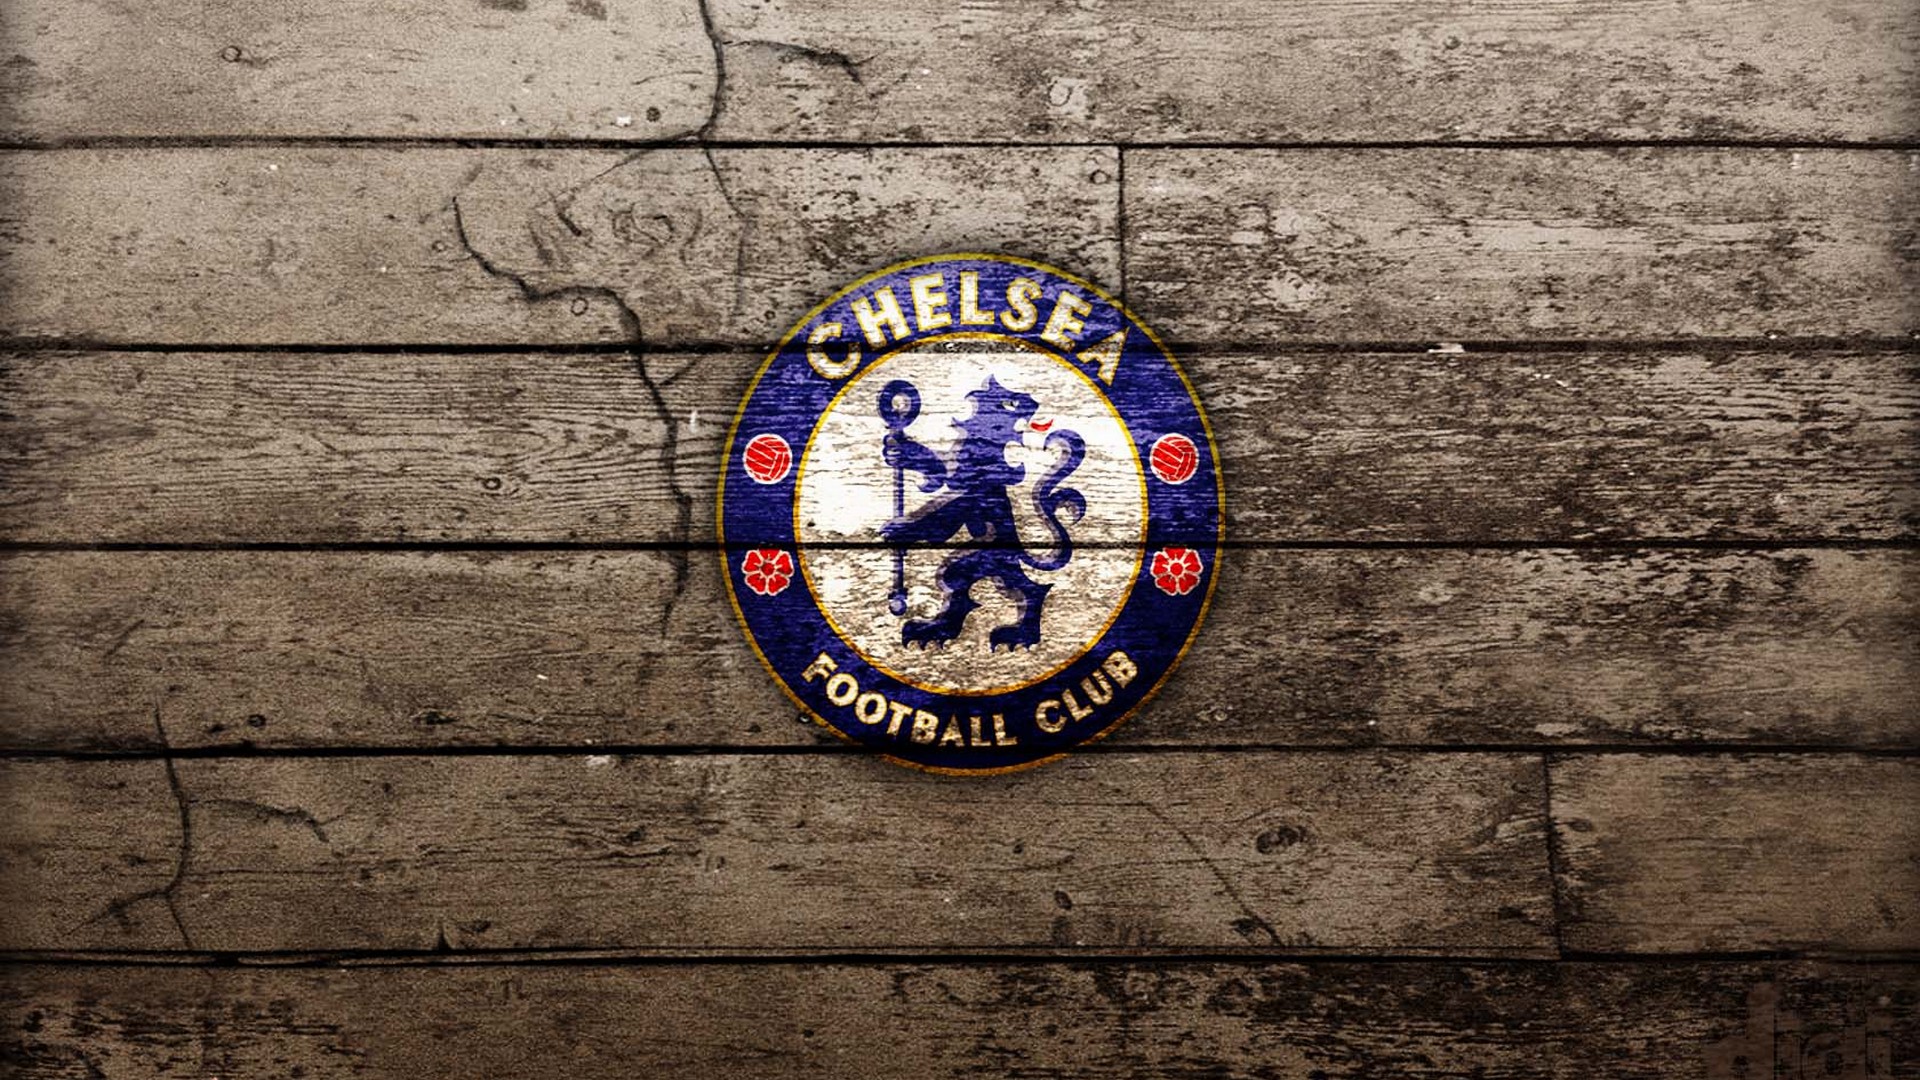 HD Backgrounds Chelsea FC With high-resolution 1920X1080 pixel. You can use this wallpaper for your Desktop Computers, Mac Screensavers, Windows Backgrounds, iPhone Wallpapers, Tablet or Android Lock screen and another Mobile device